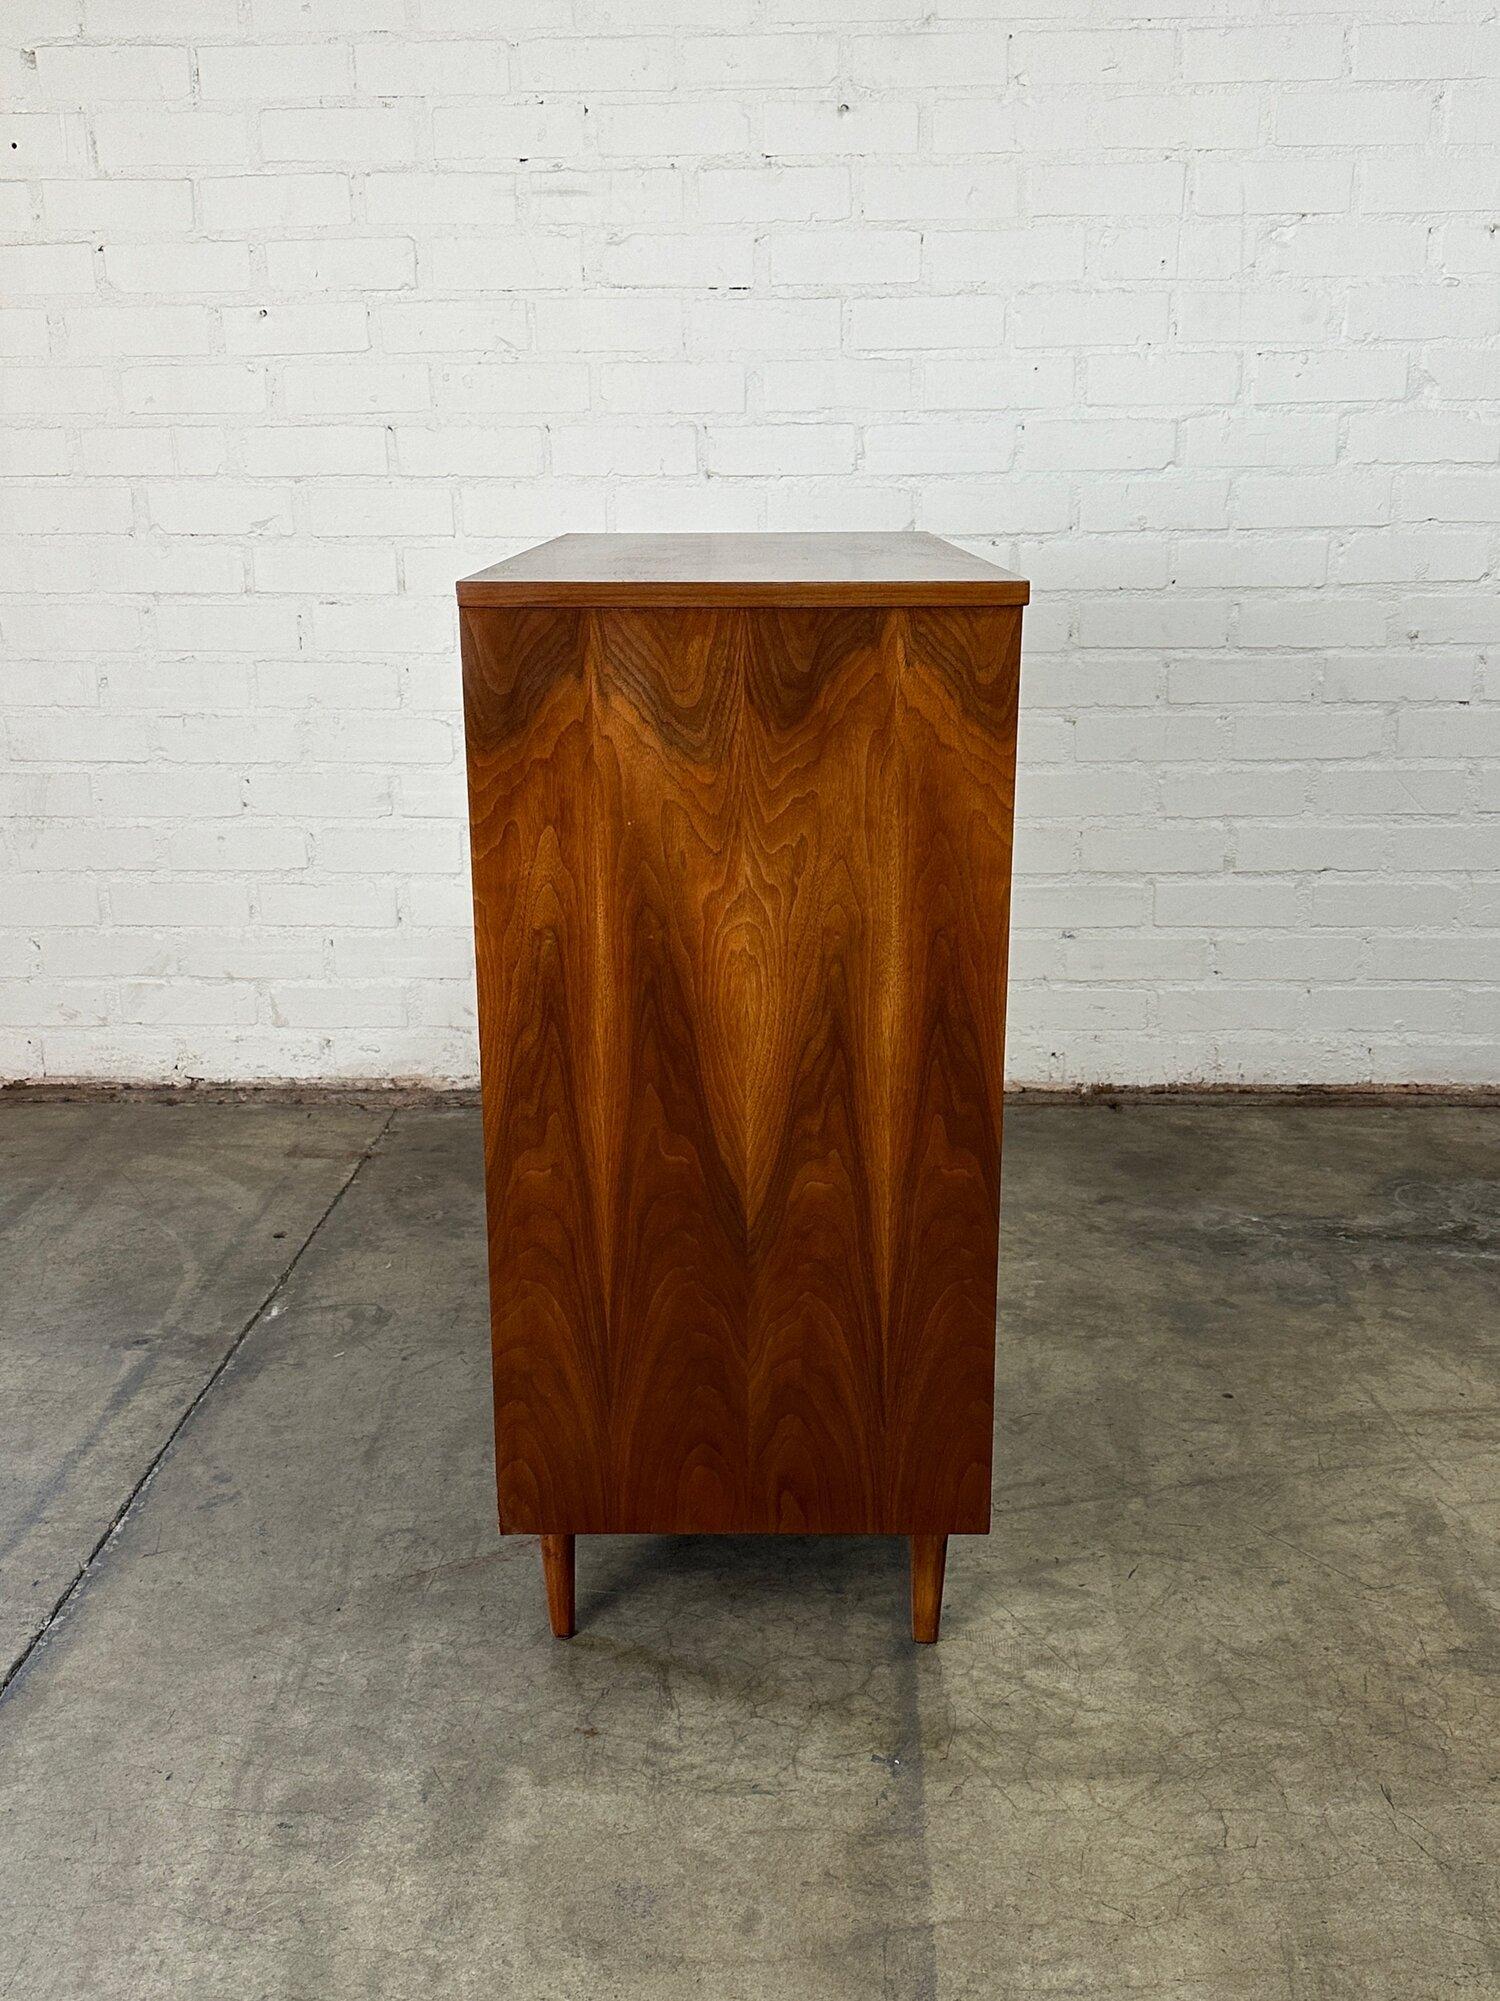 Highboy dresser with cross grain detail For Sale 2